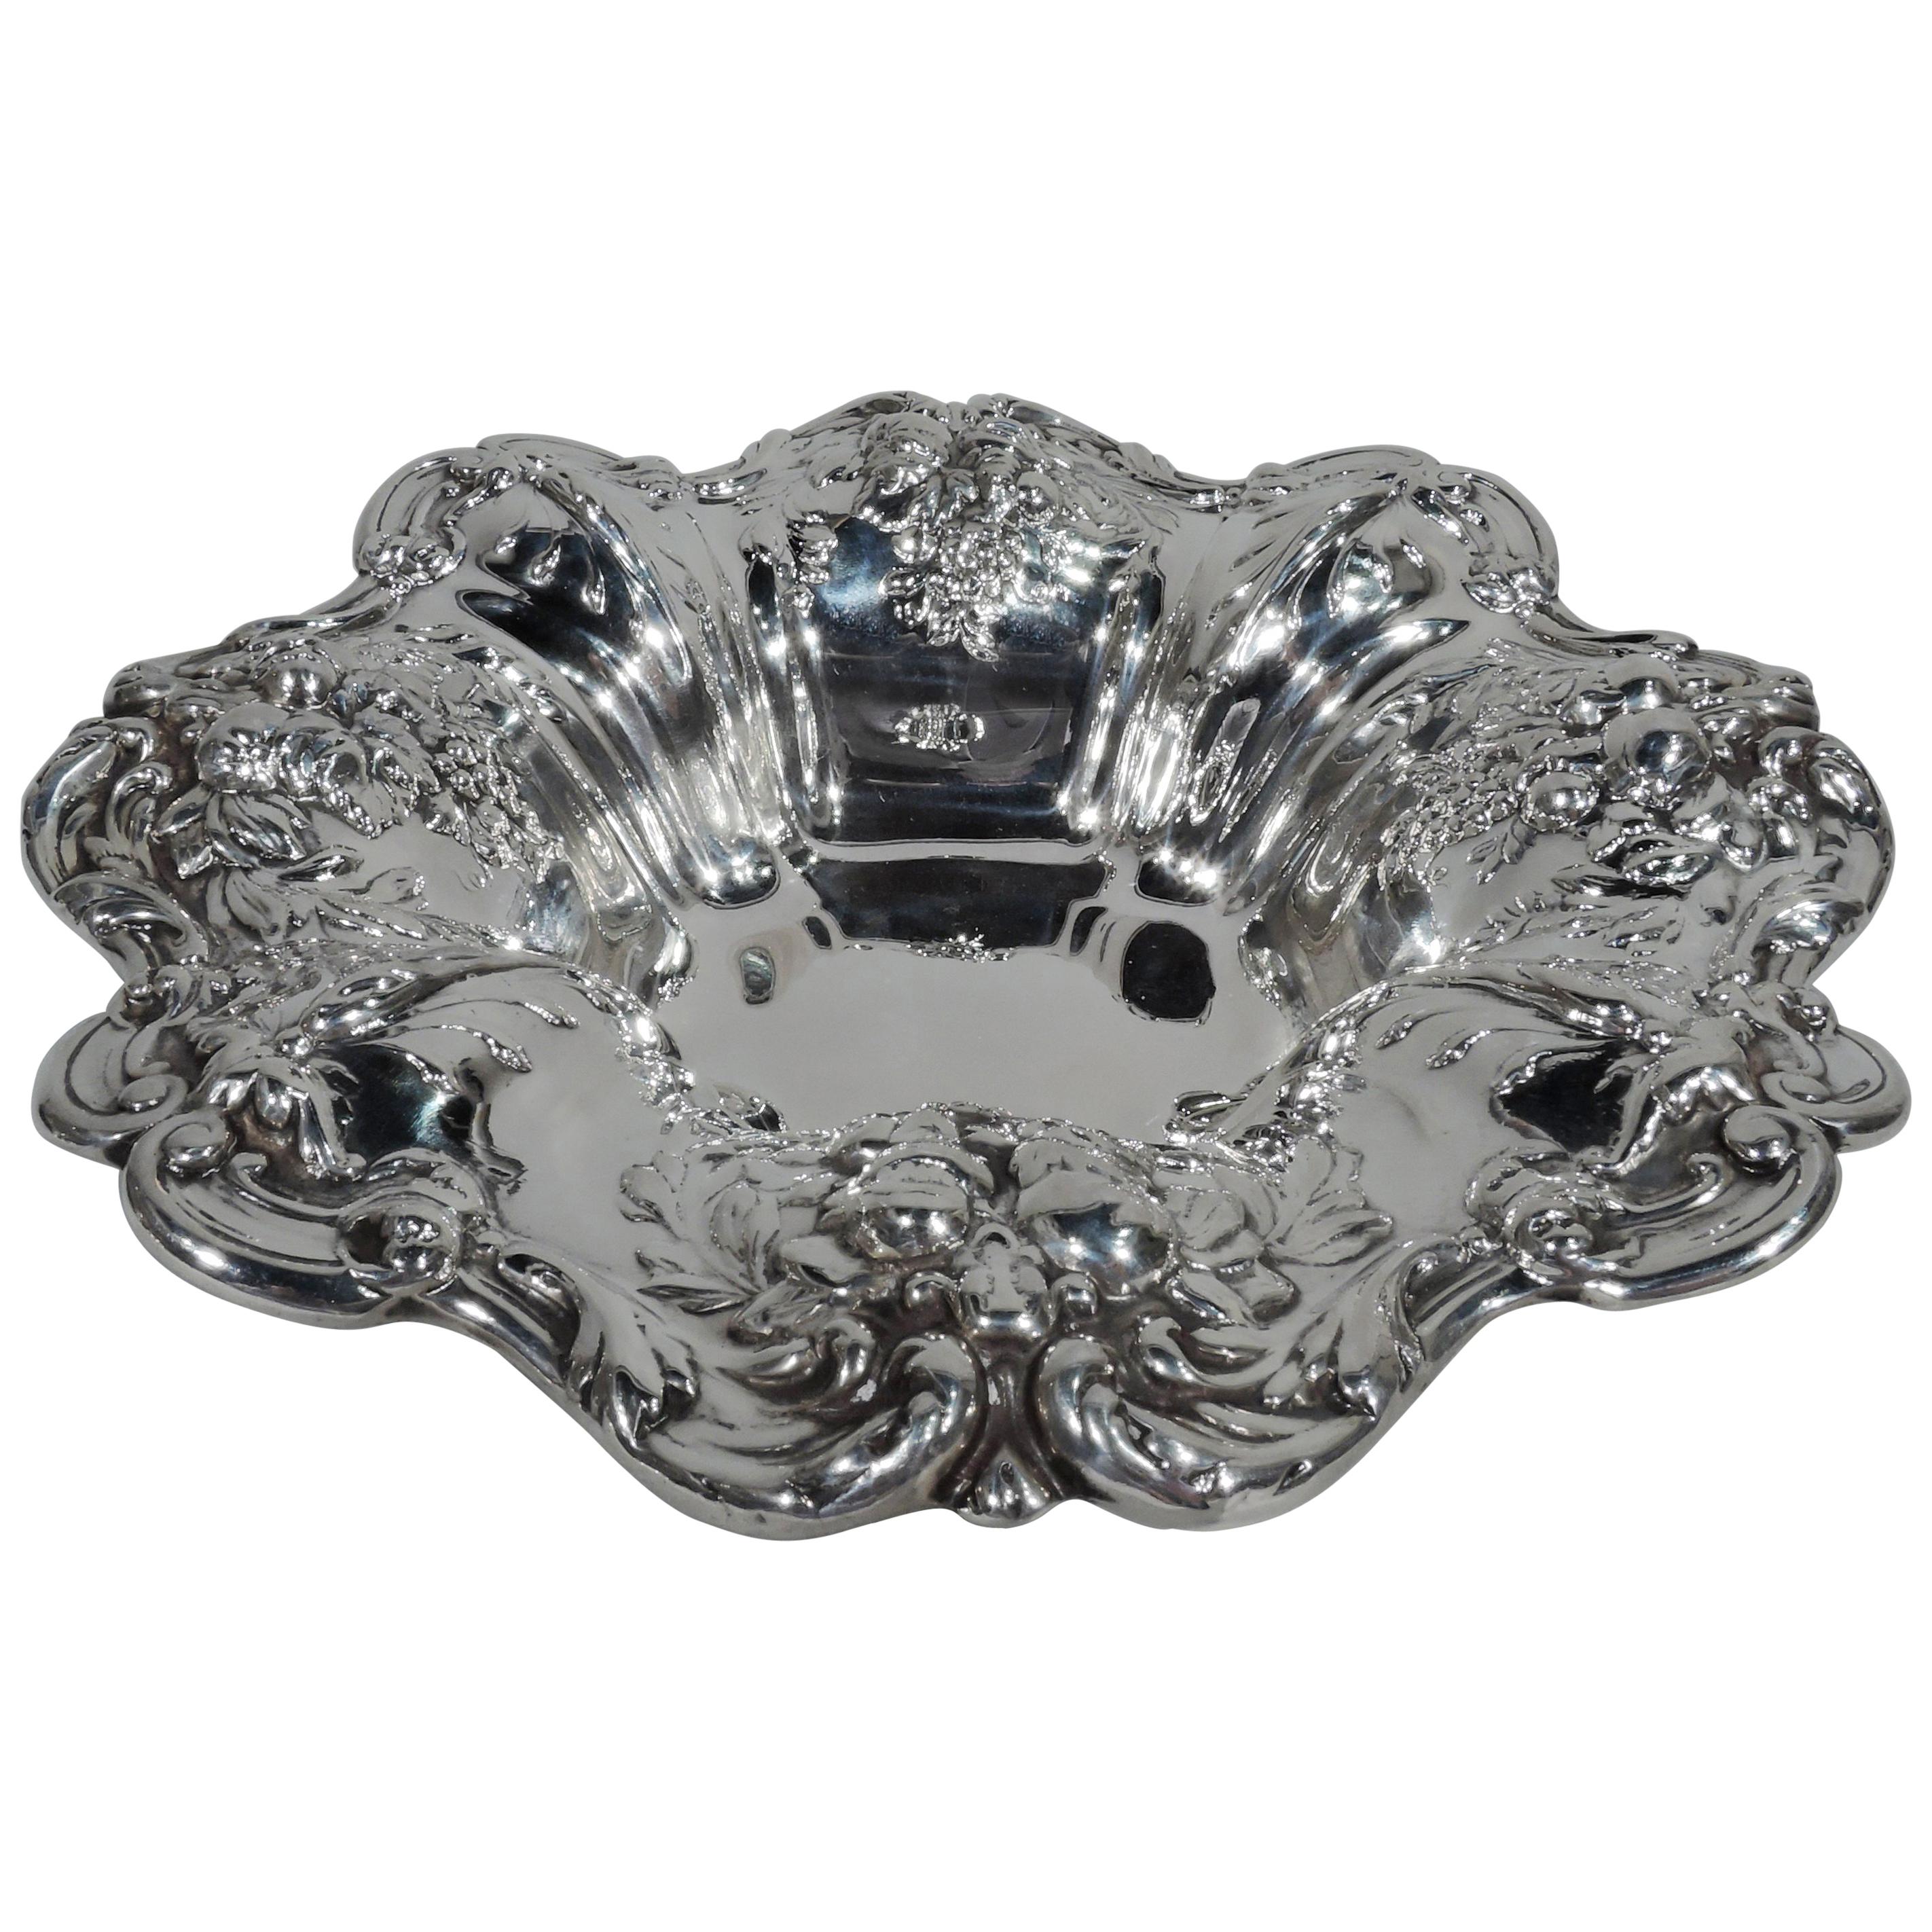 Reed & Barton Sterling Silver Bowl in Beloved Francis I Pattern